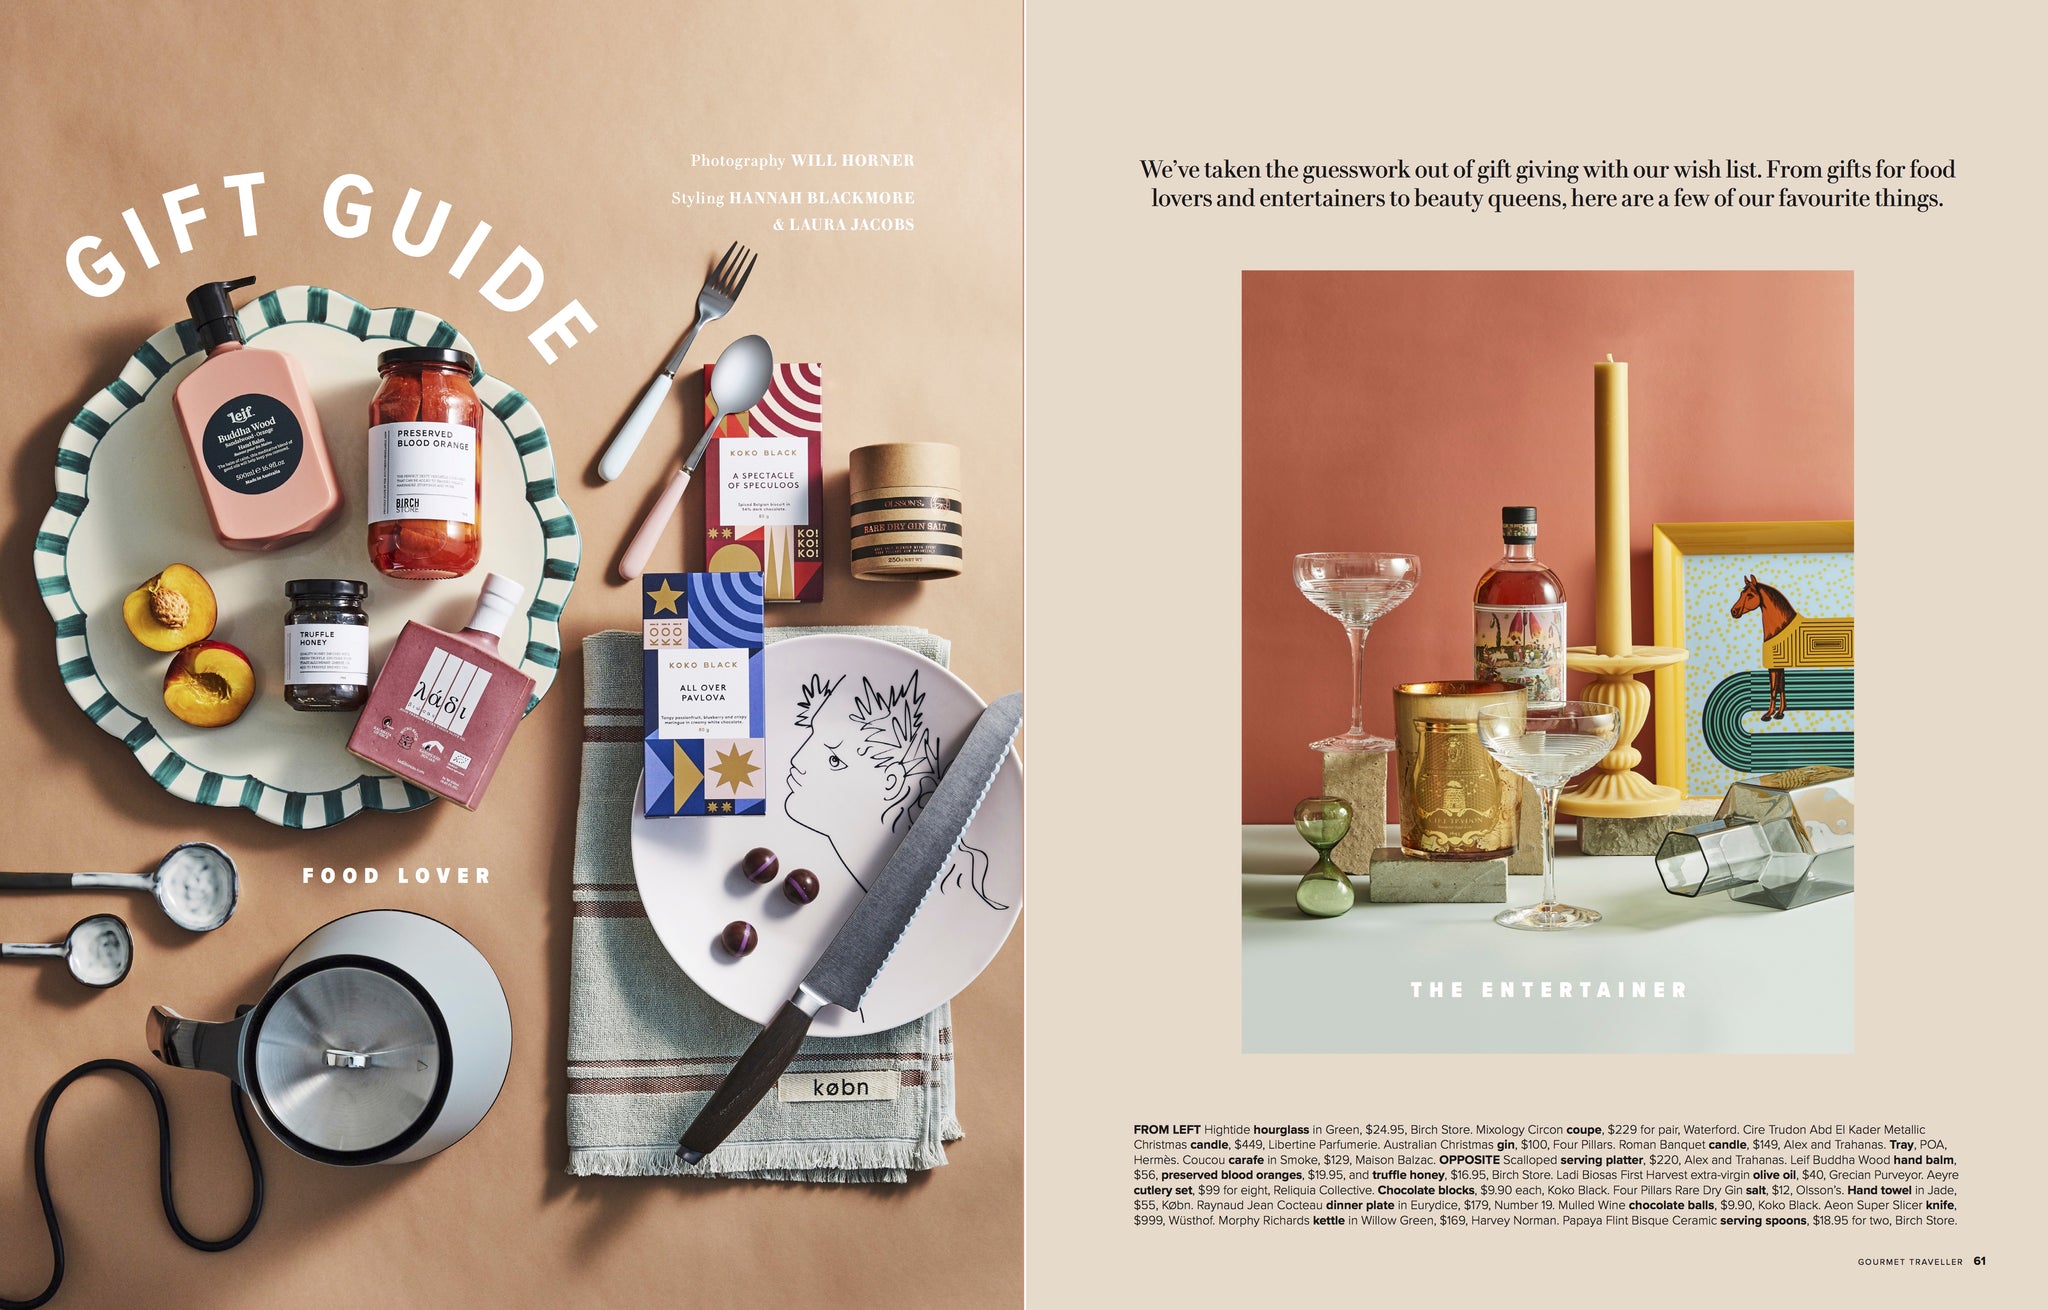 Gourmet Traveller Magazine selects Grecian Purveyor for their official Christmas 2020 gift guide for gourmet food lovers.